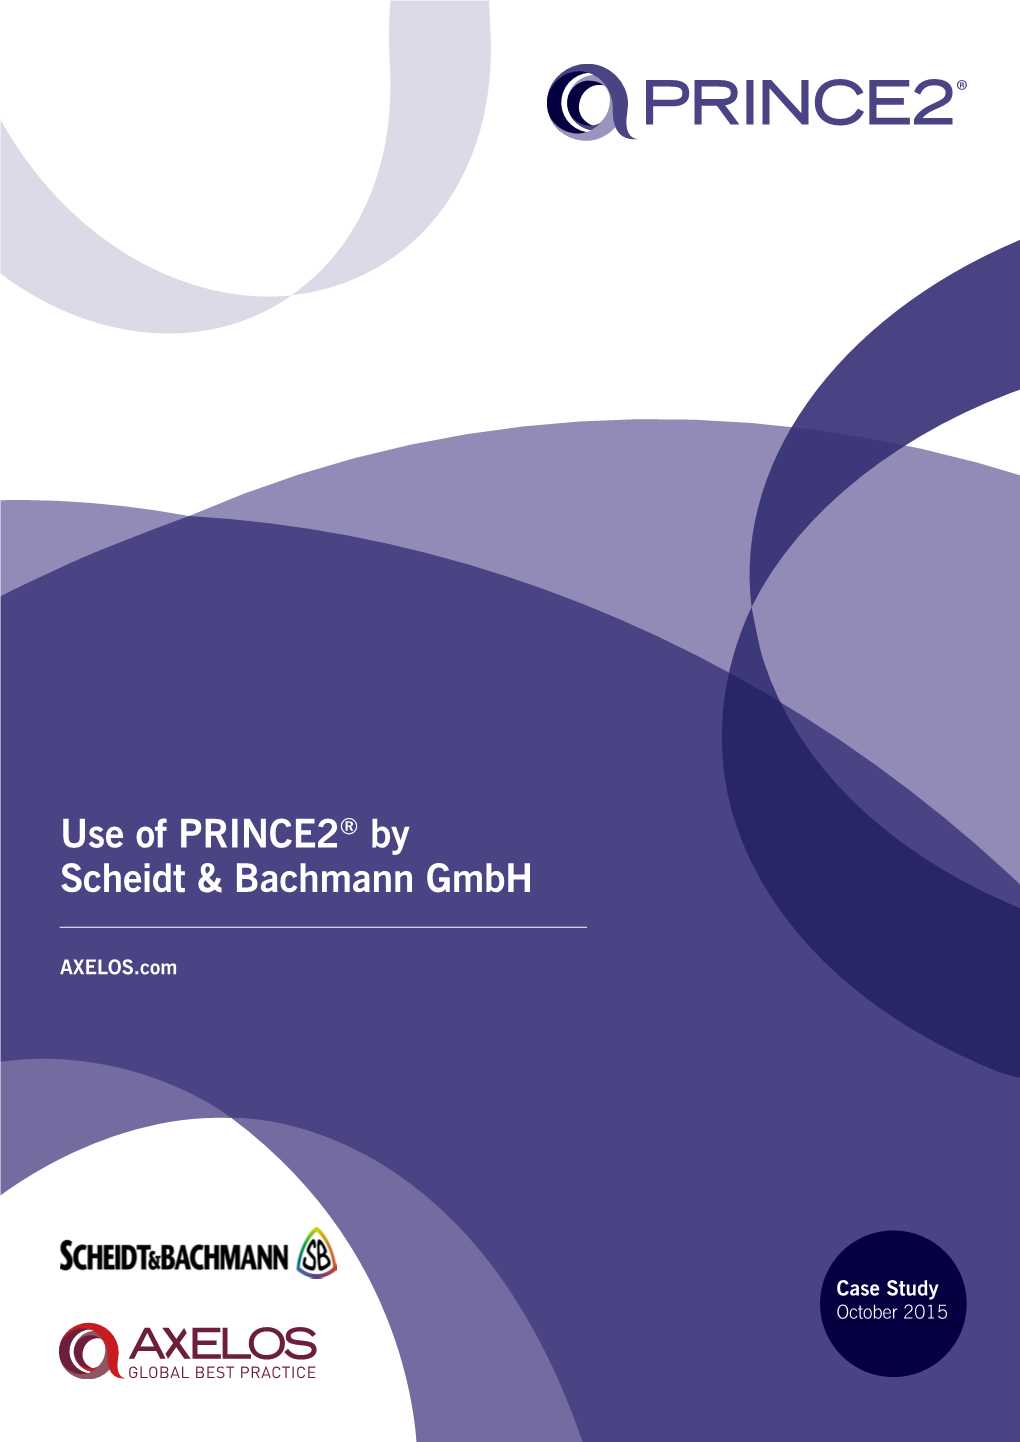 Use of PRINCE2® by Scheidt & Bachmann Gmbh